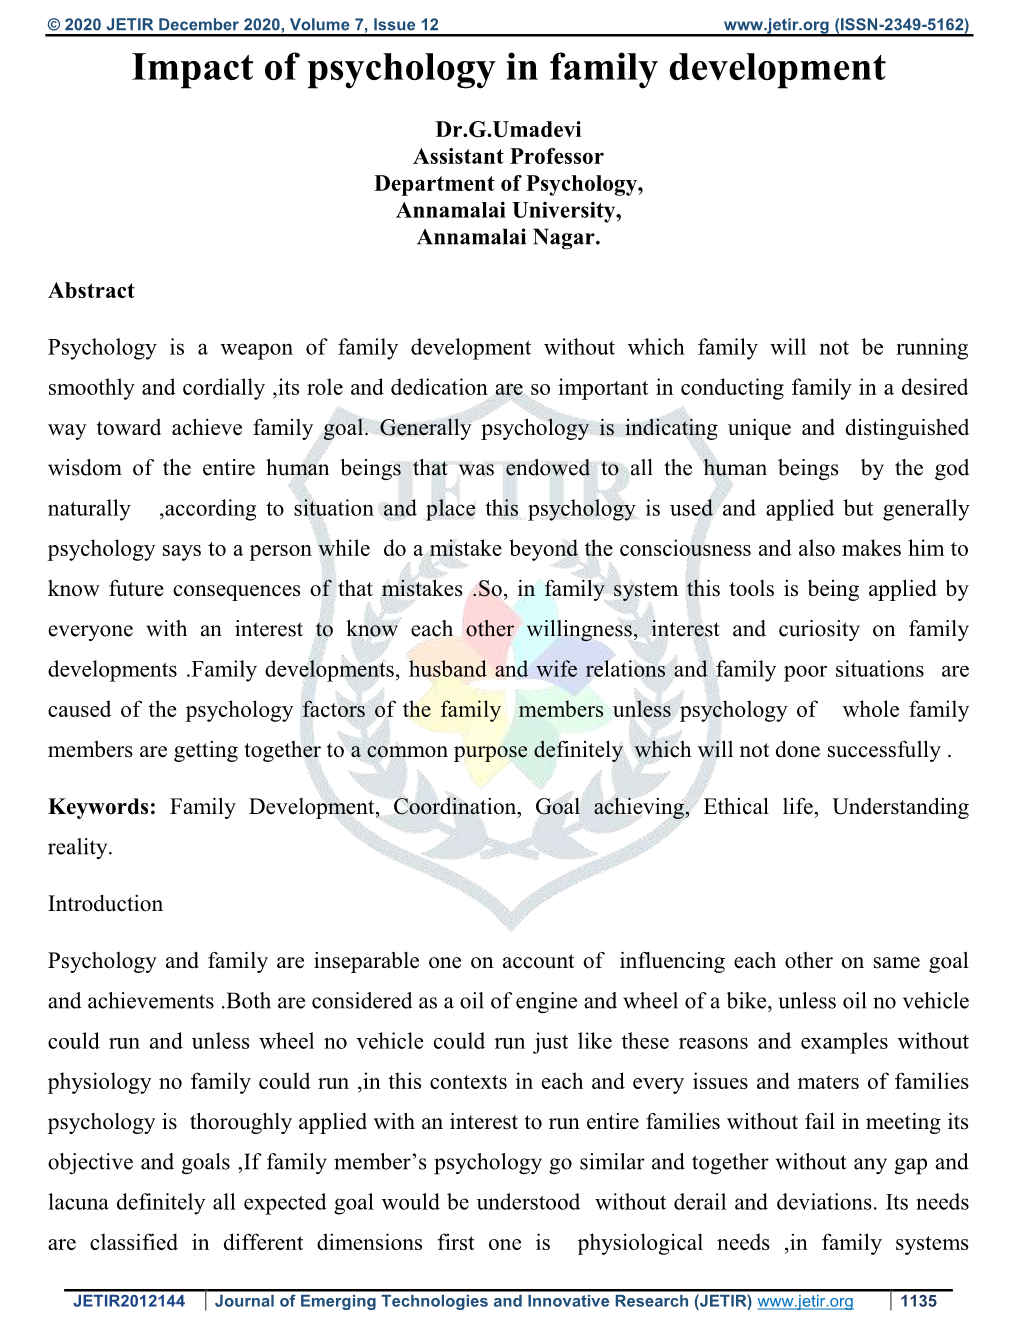 Impact of Psychology in Family Development